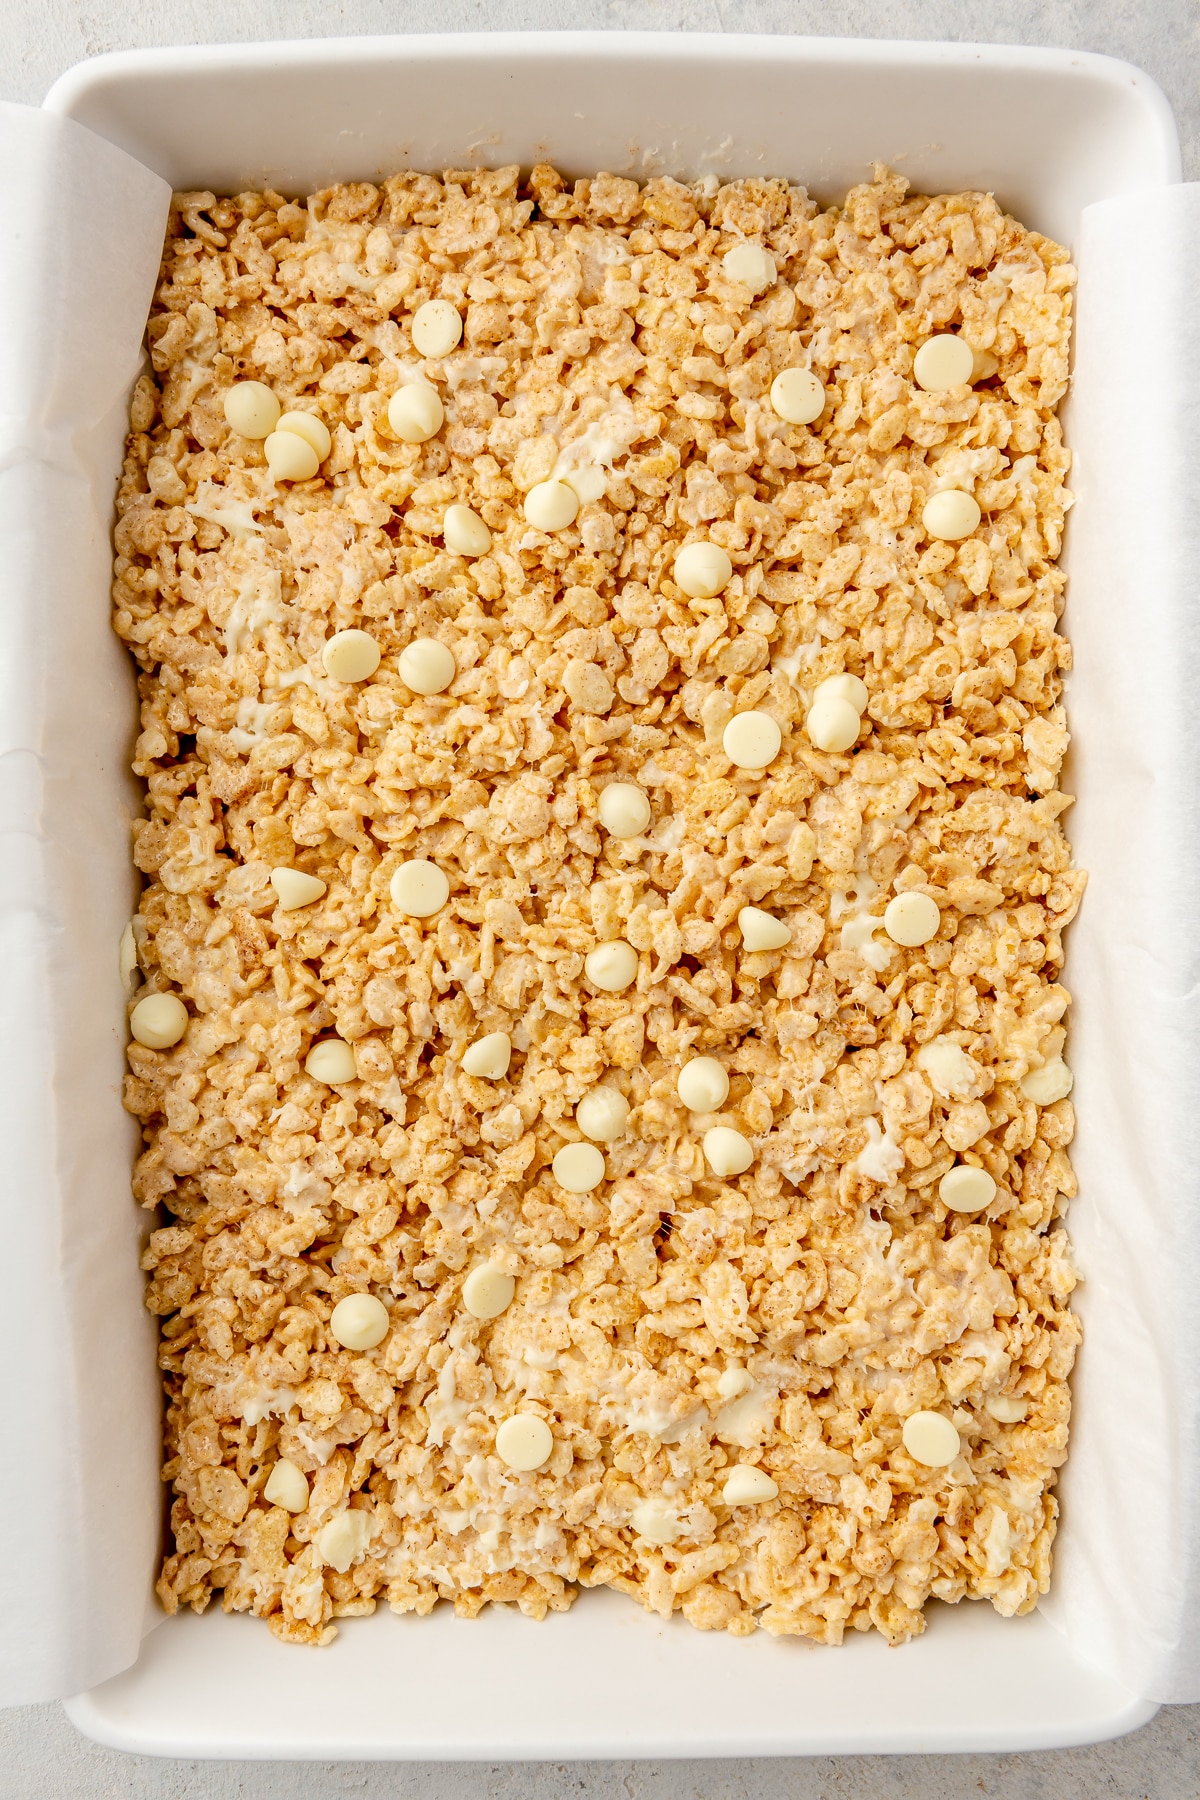 A pumpkin spice rice krispie treat mixture pressed into a parchment paper lined baking dish.